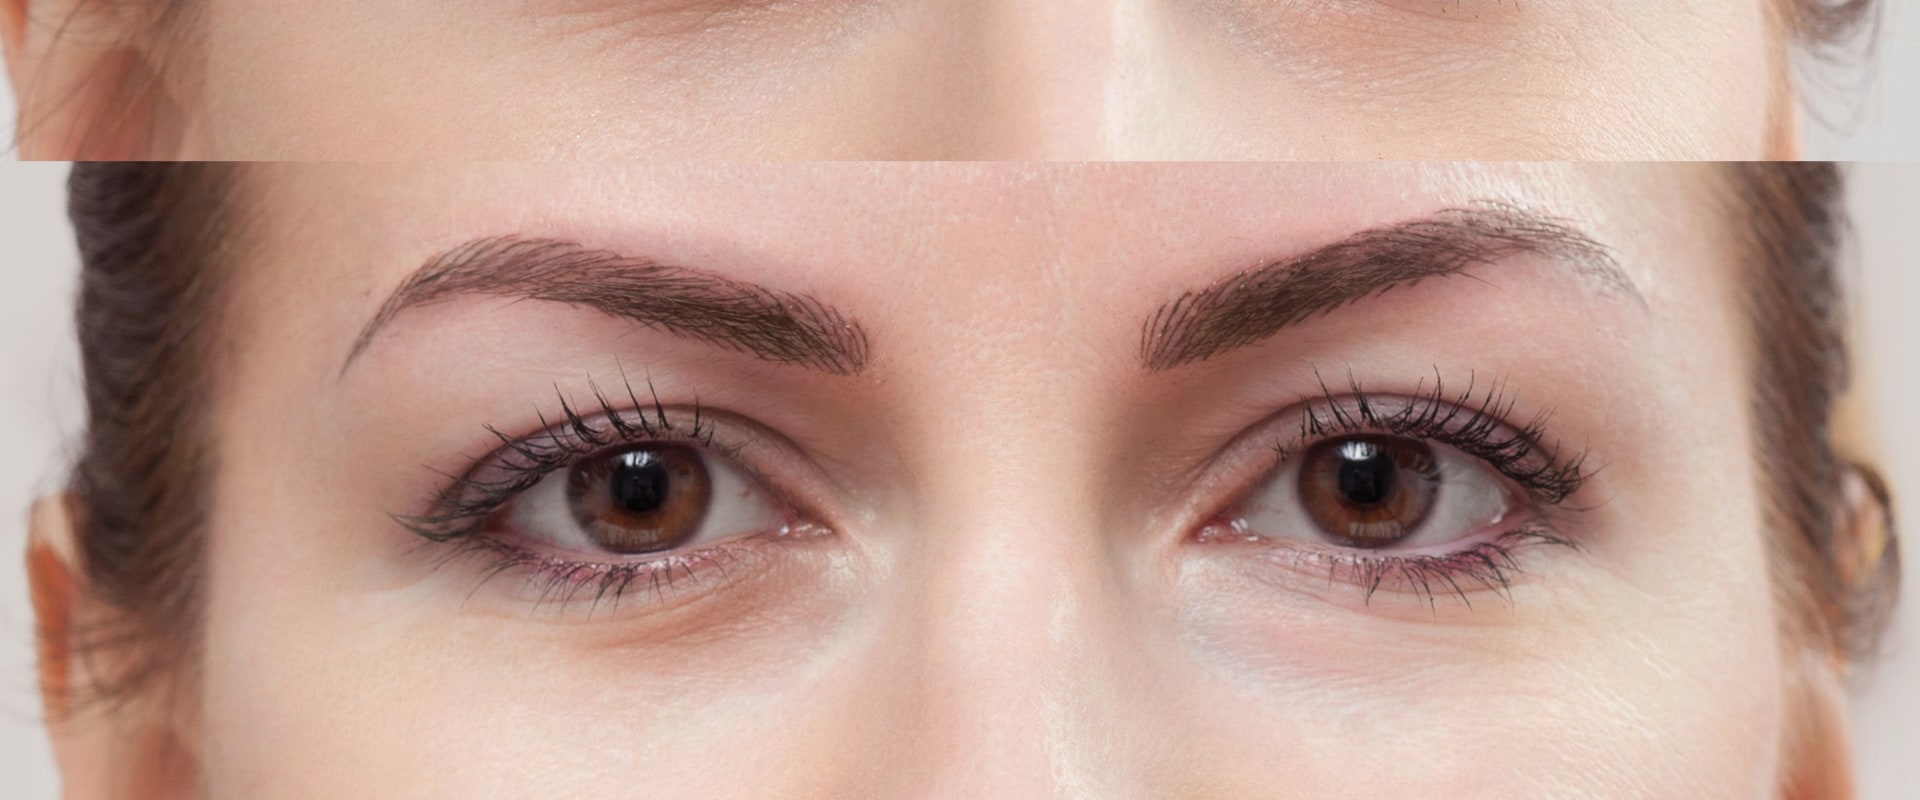 What is better permanent makeup or microblading?